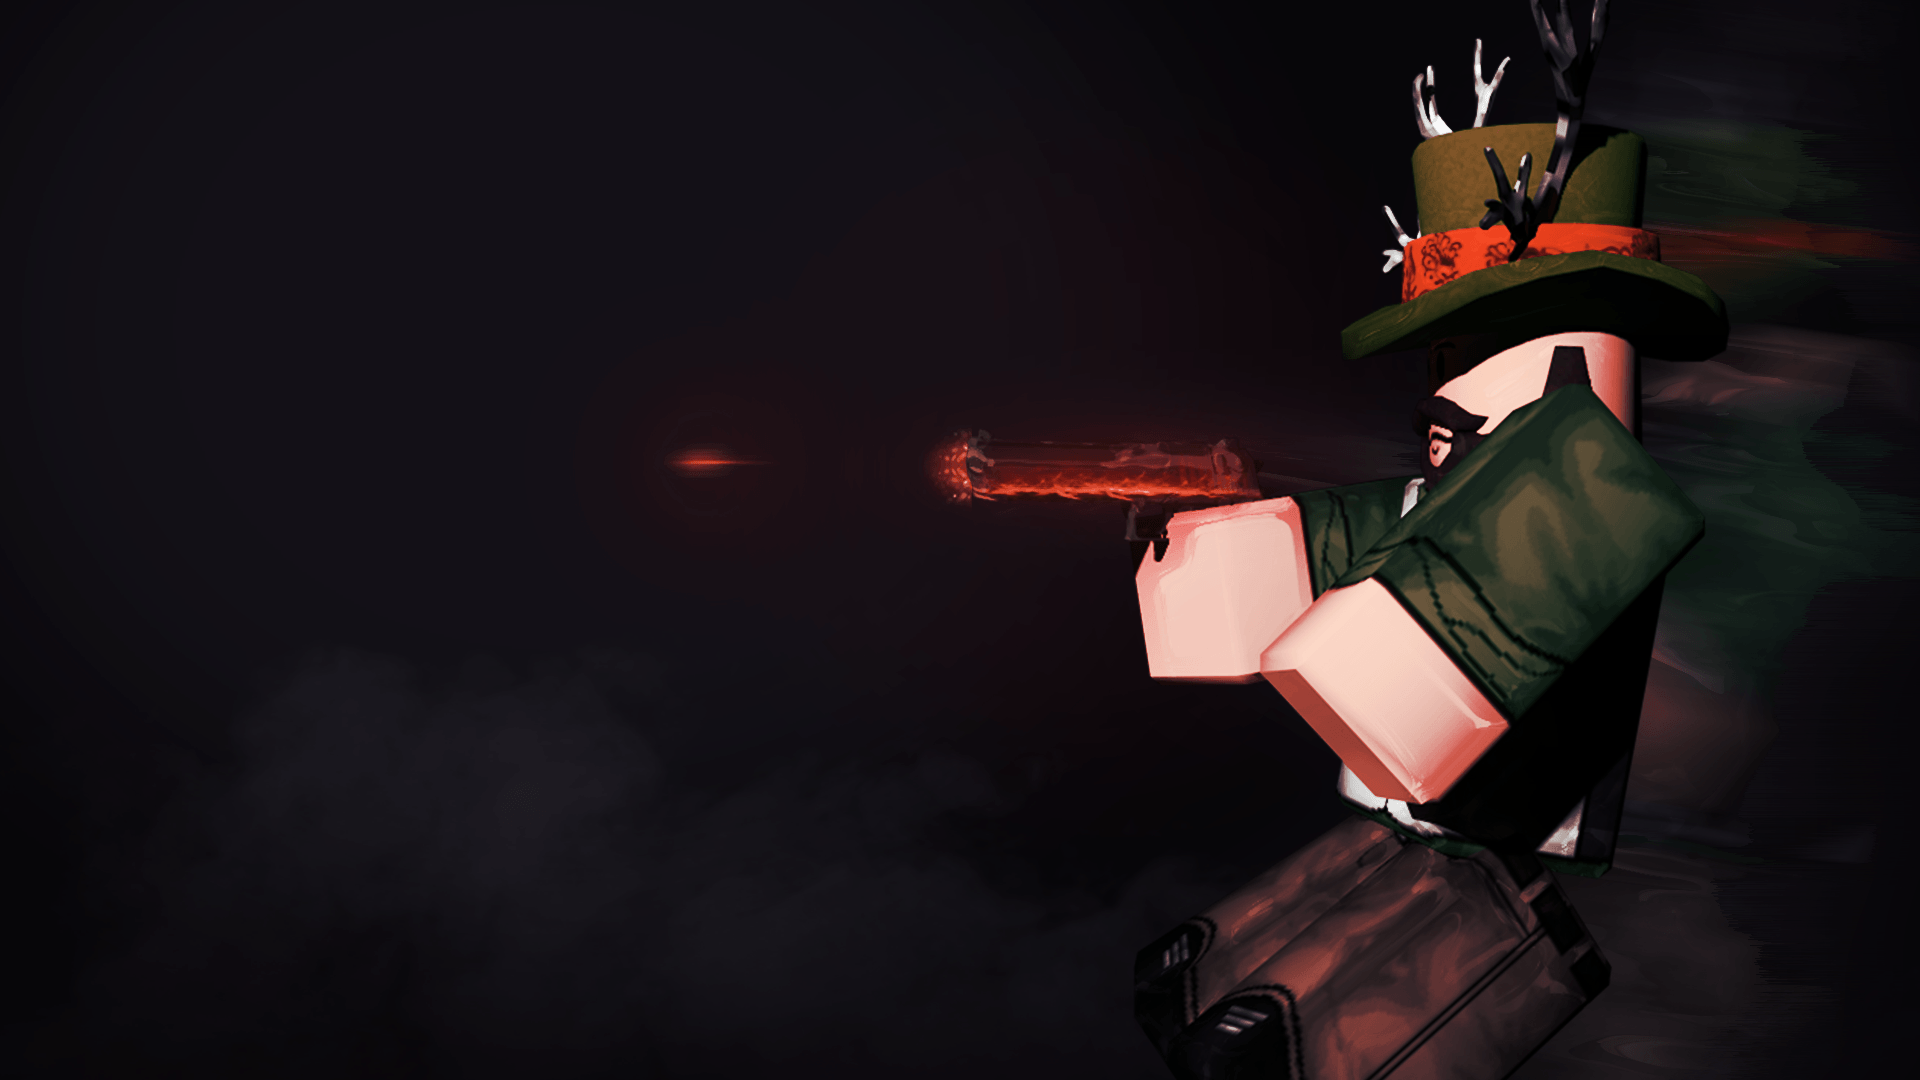 Epic Roblox wallpaper by Hamster_M - Download on ZEDGE™